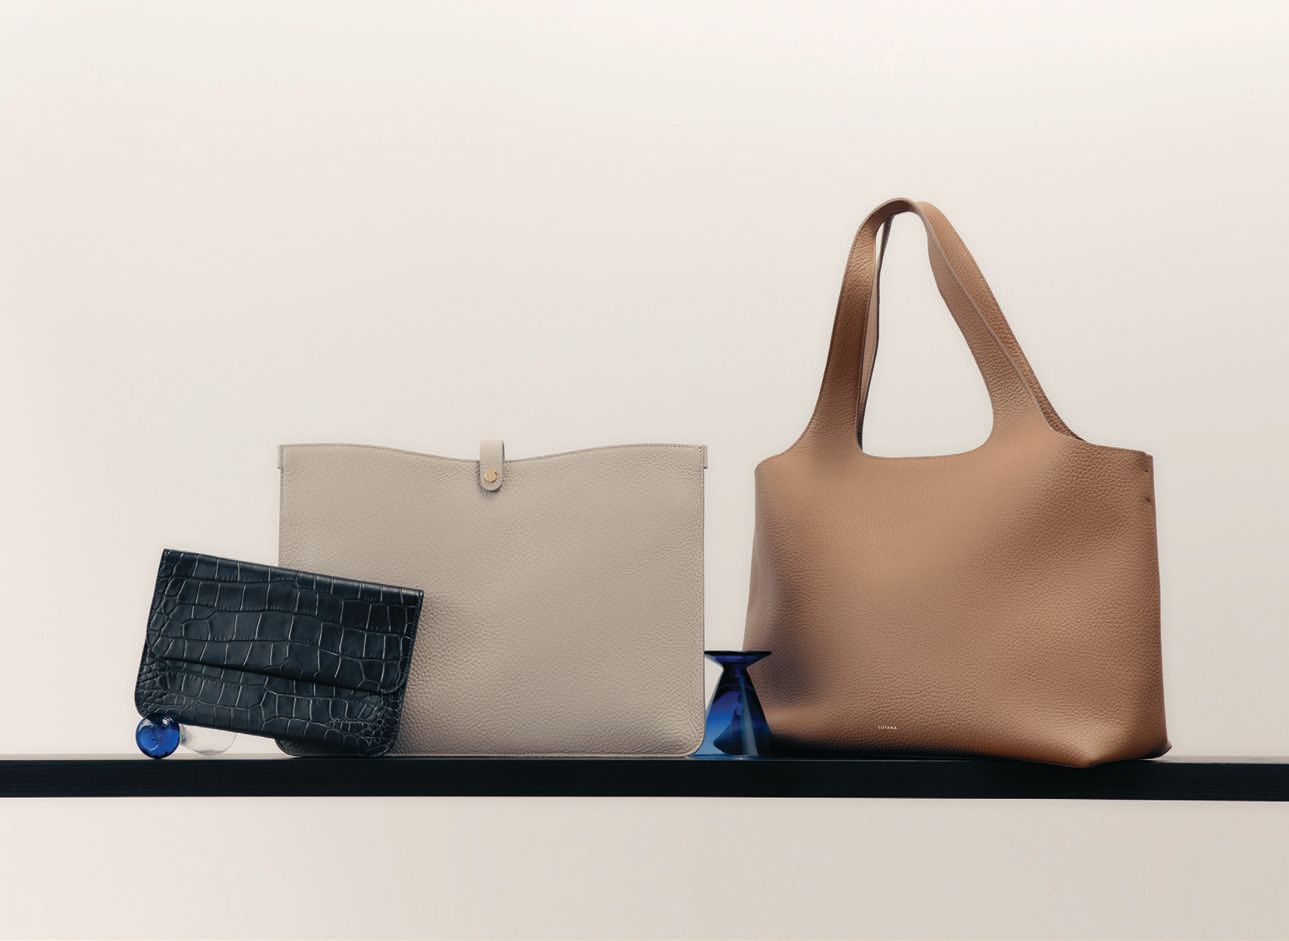 “This fall we expanded our offerings to become the go-to destination for beautiful ‘Fewer, Better’ products,” Gallardo says, on the heels of the System tote launch, among other new items such as onyx jewelry PHOTO COURTESY OF CUYANA